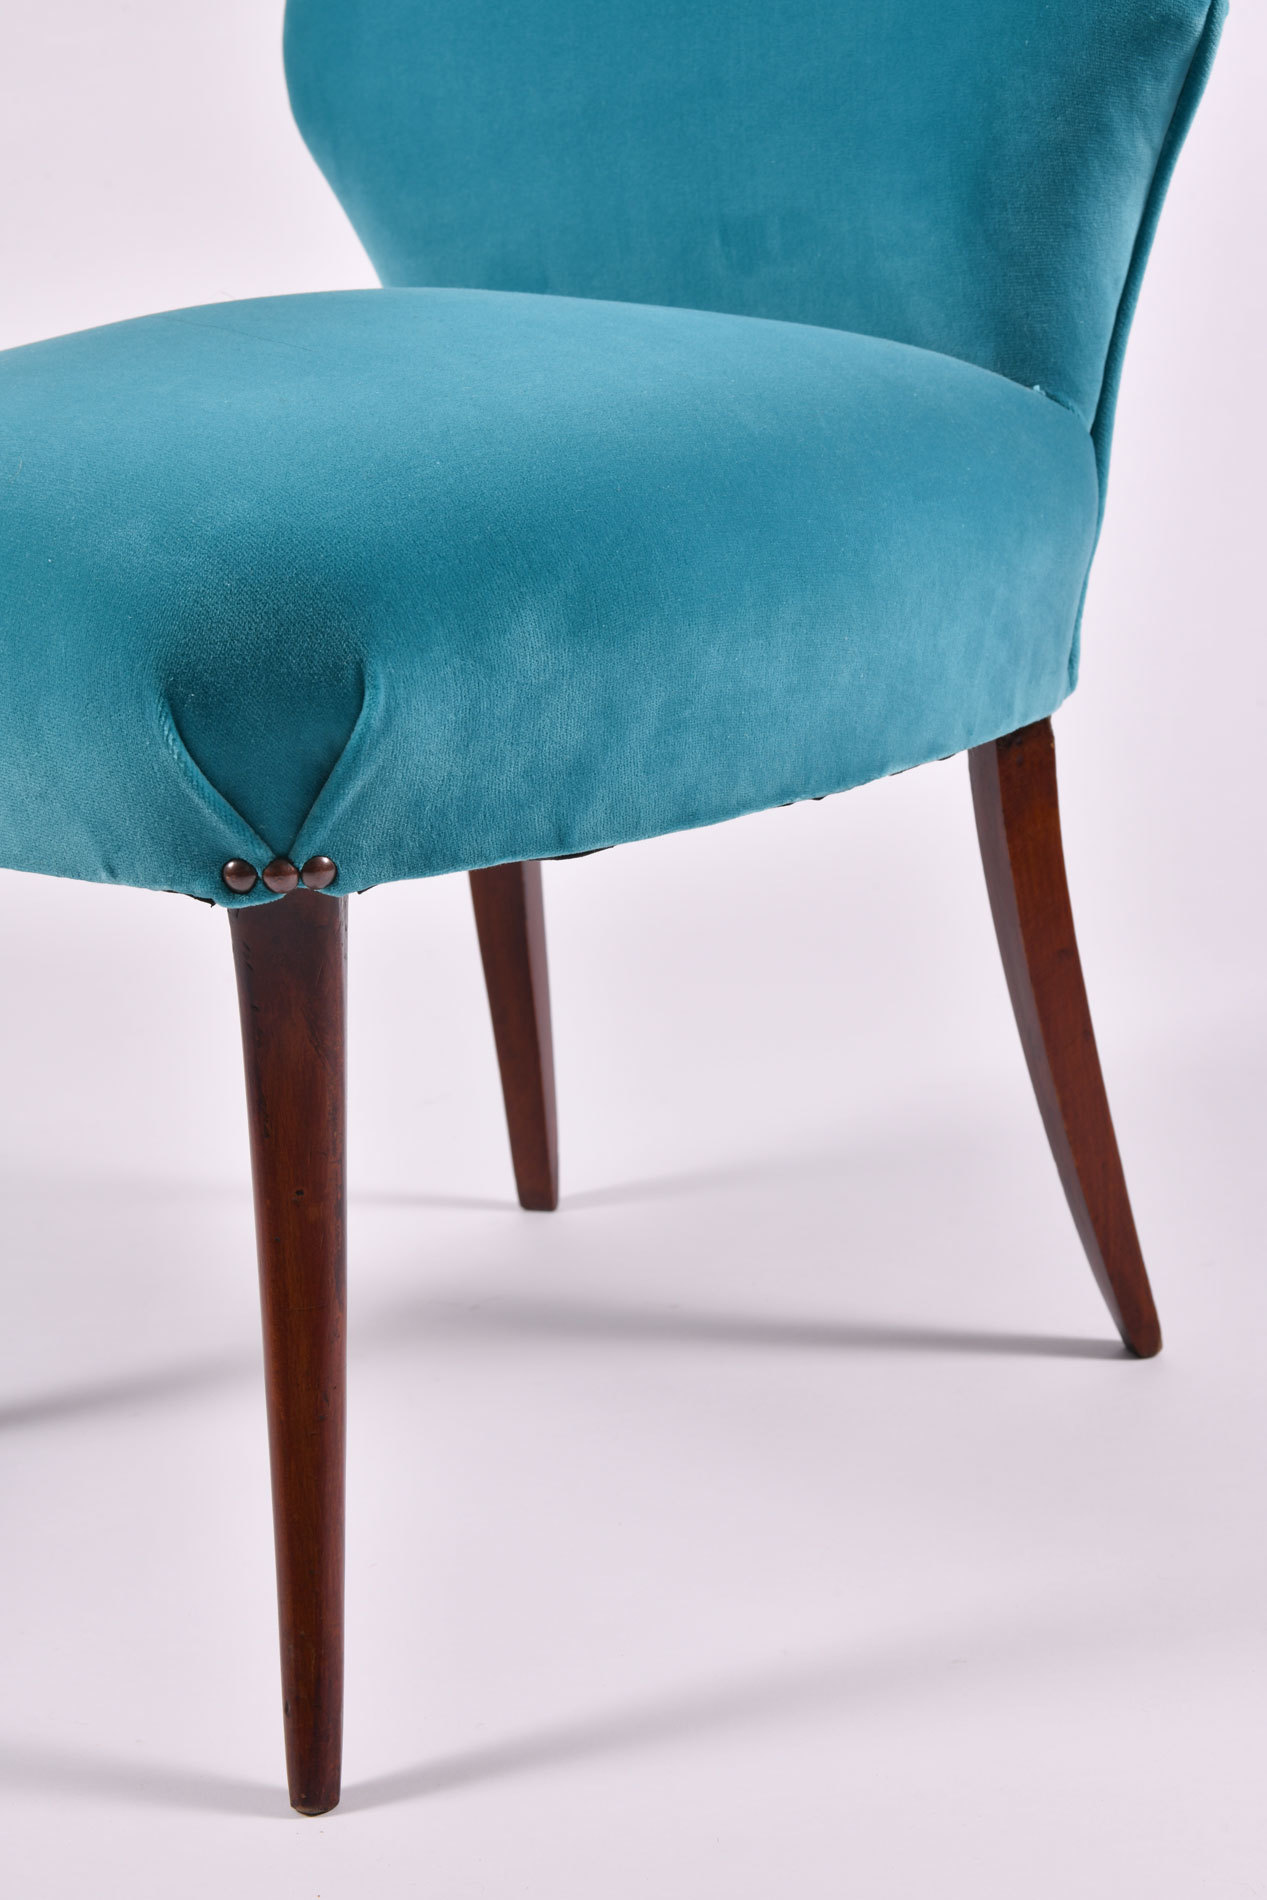 The image for Pair Turquoise Velvet Chairs 06